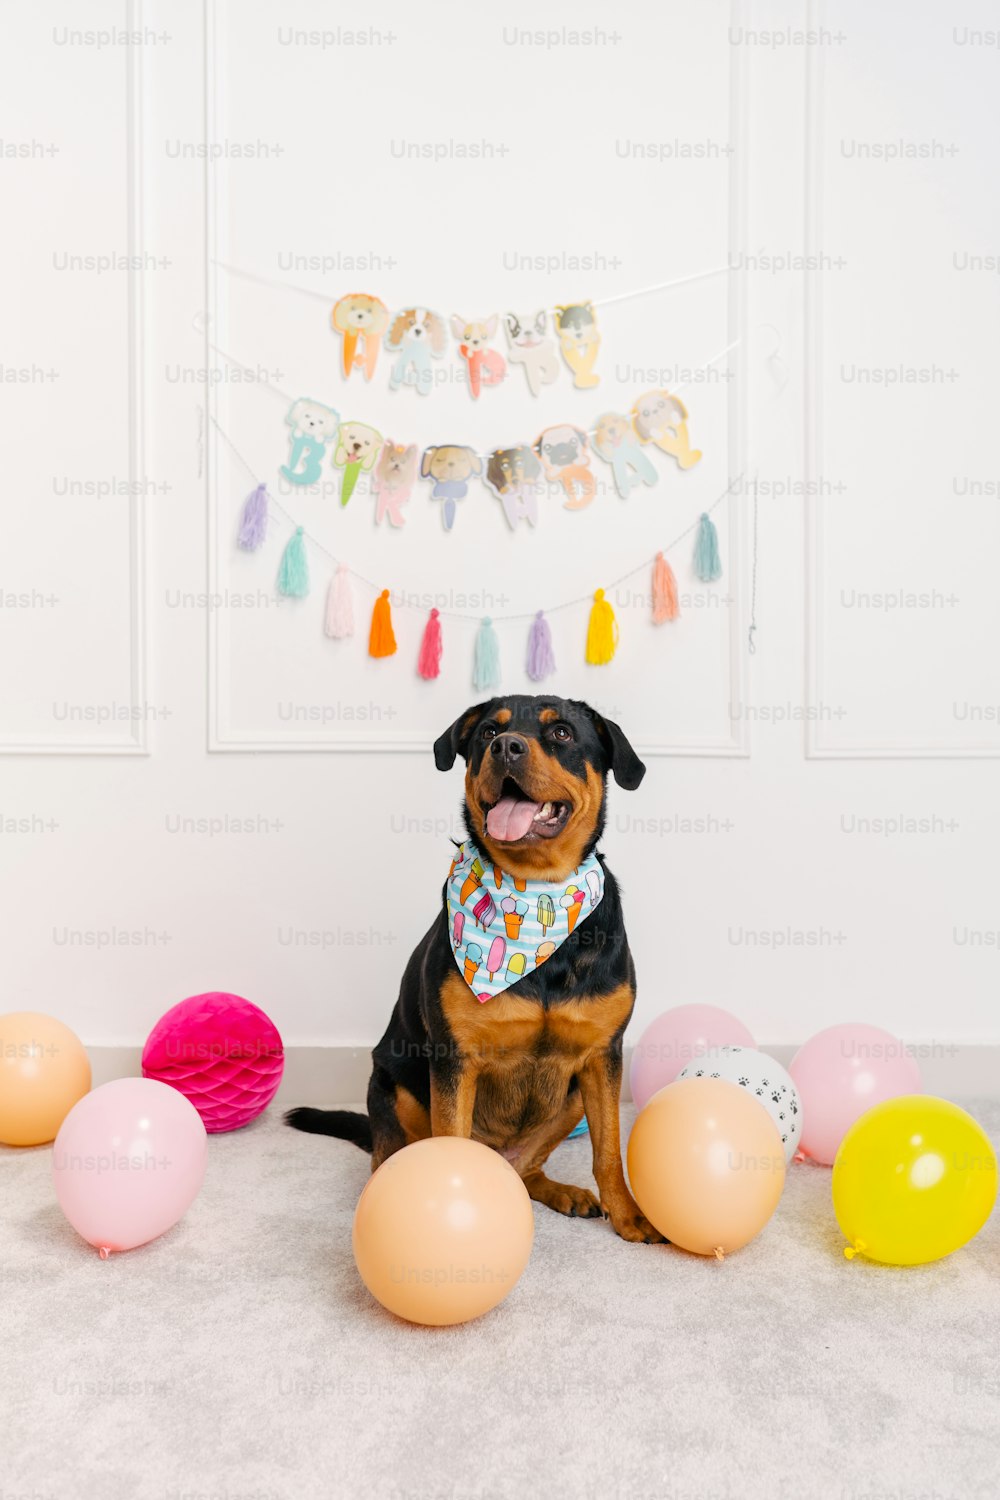 a dog sitting in front of a bunch of balloons